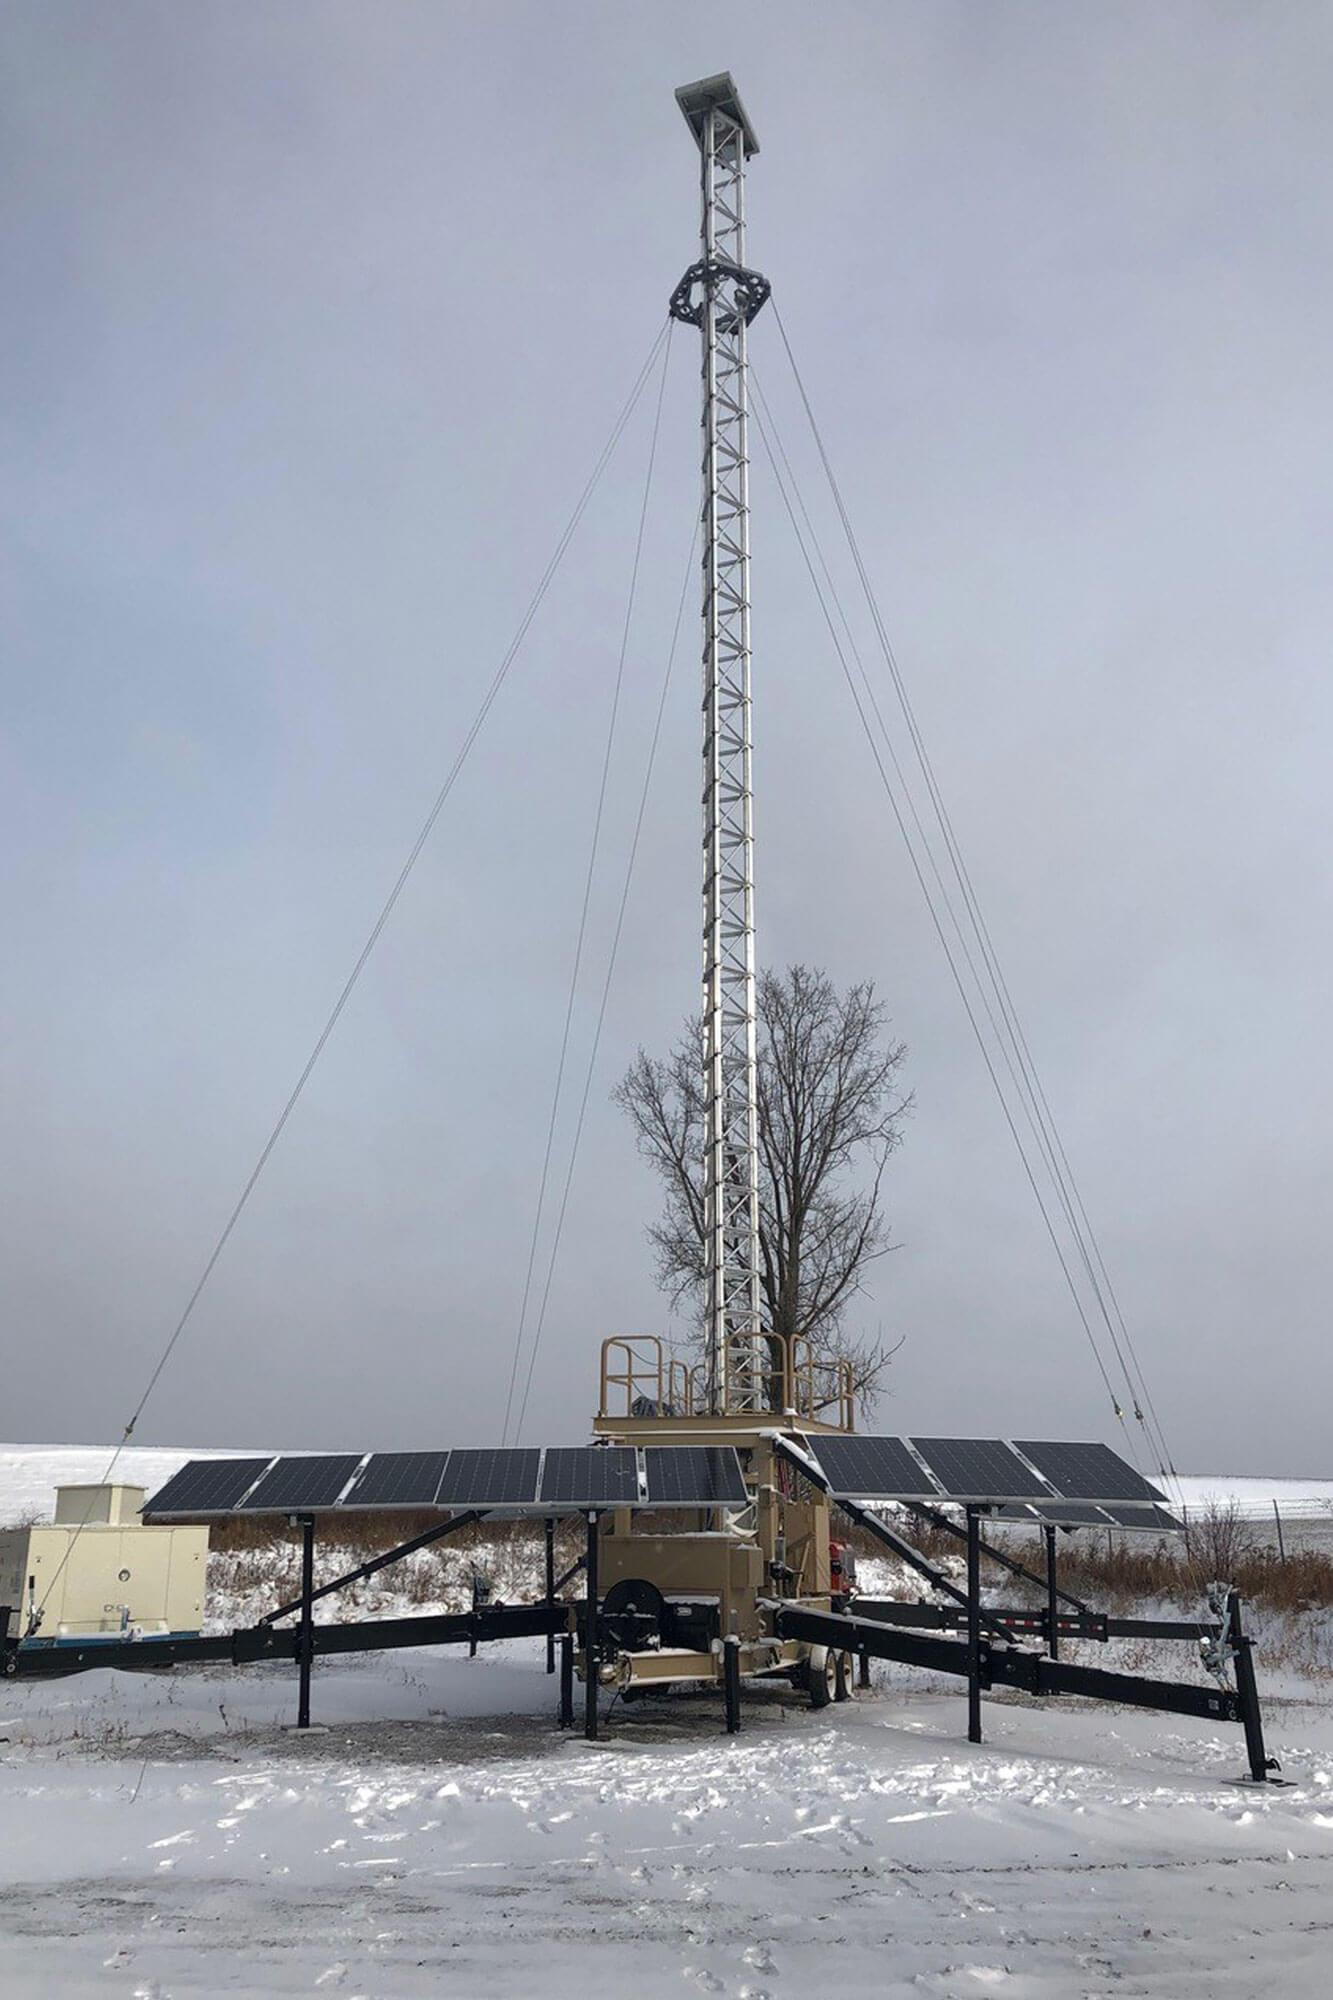 Tower extended with outriggers, solar panels.